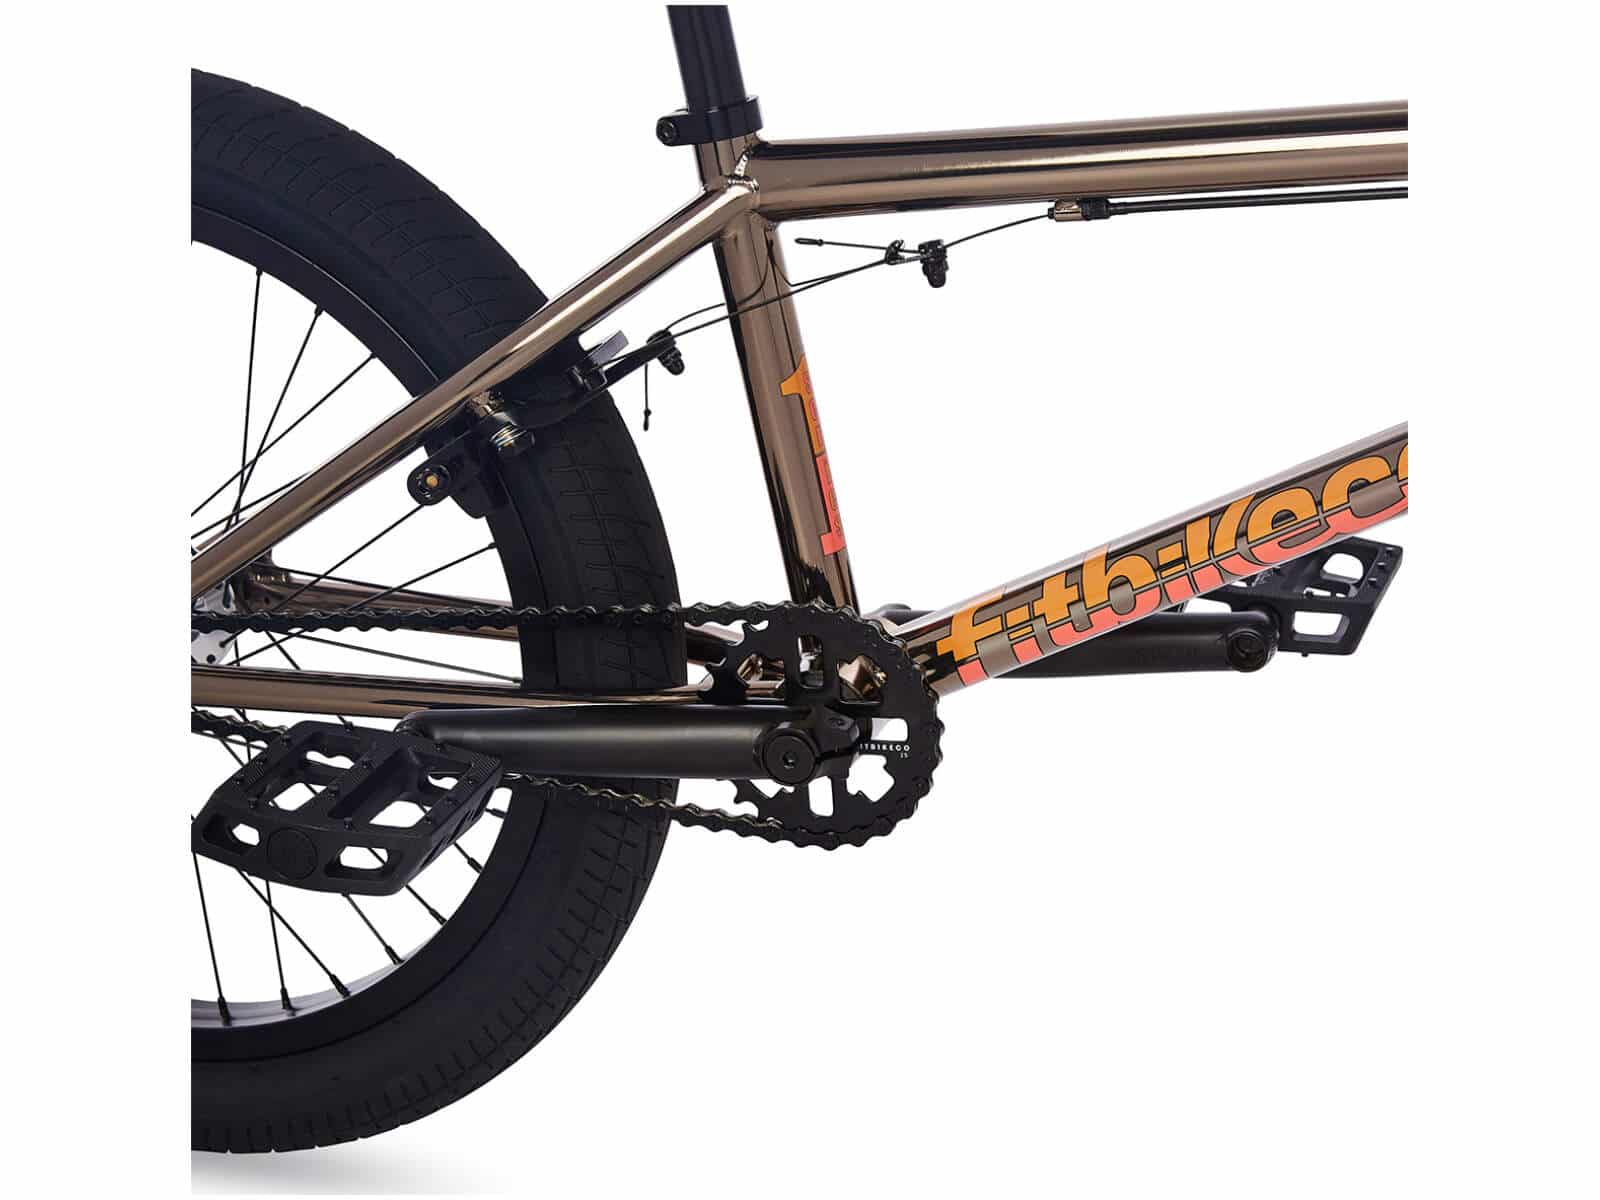 Fitbikeco SERIES ONE 20